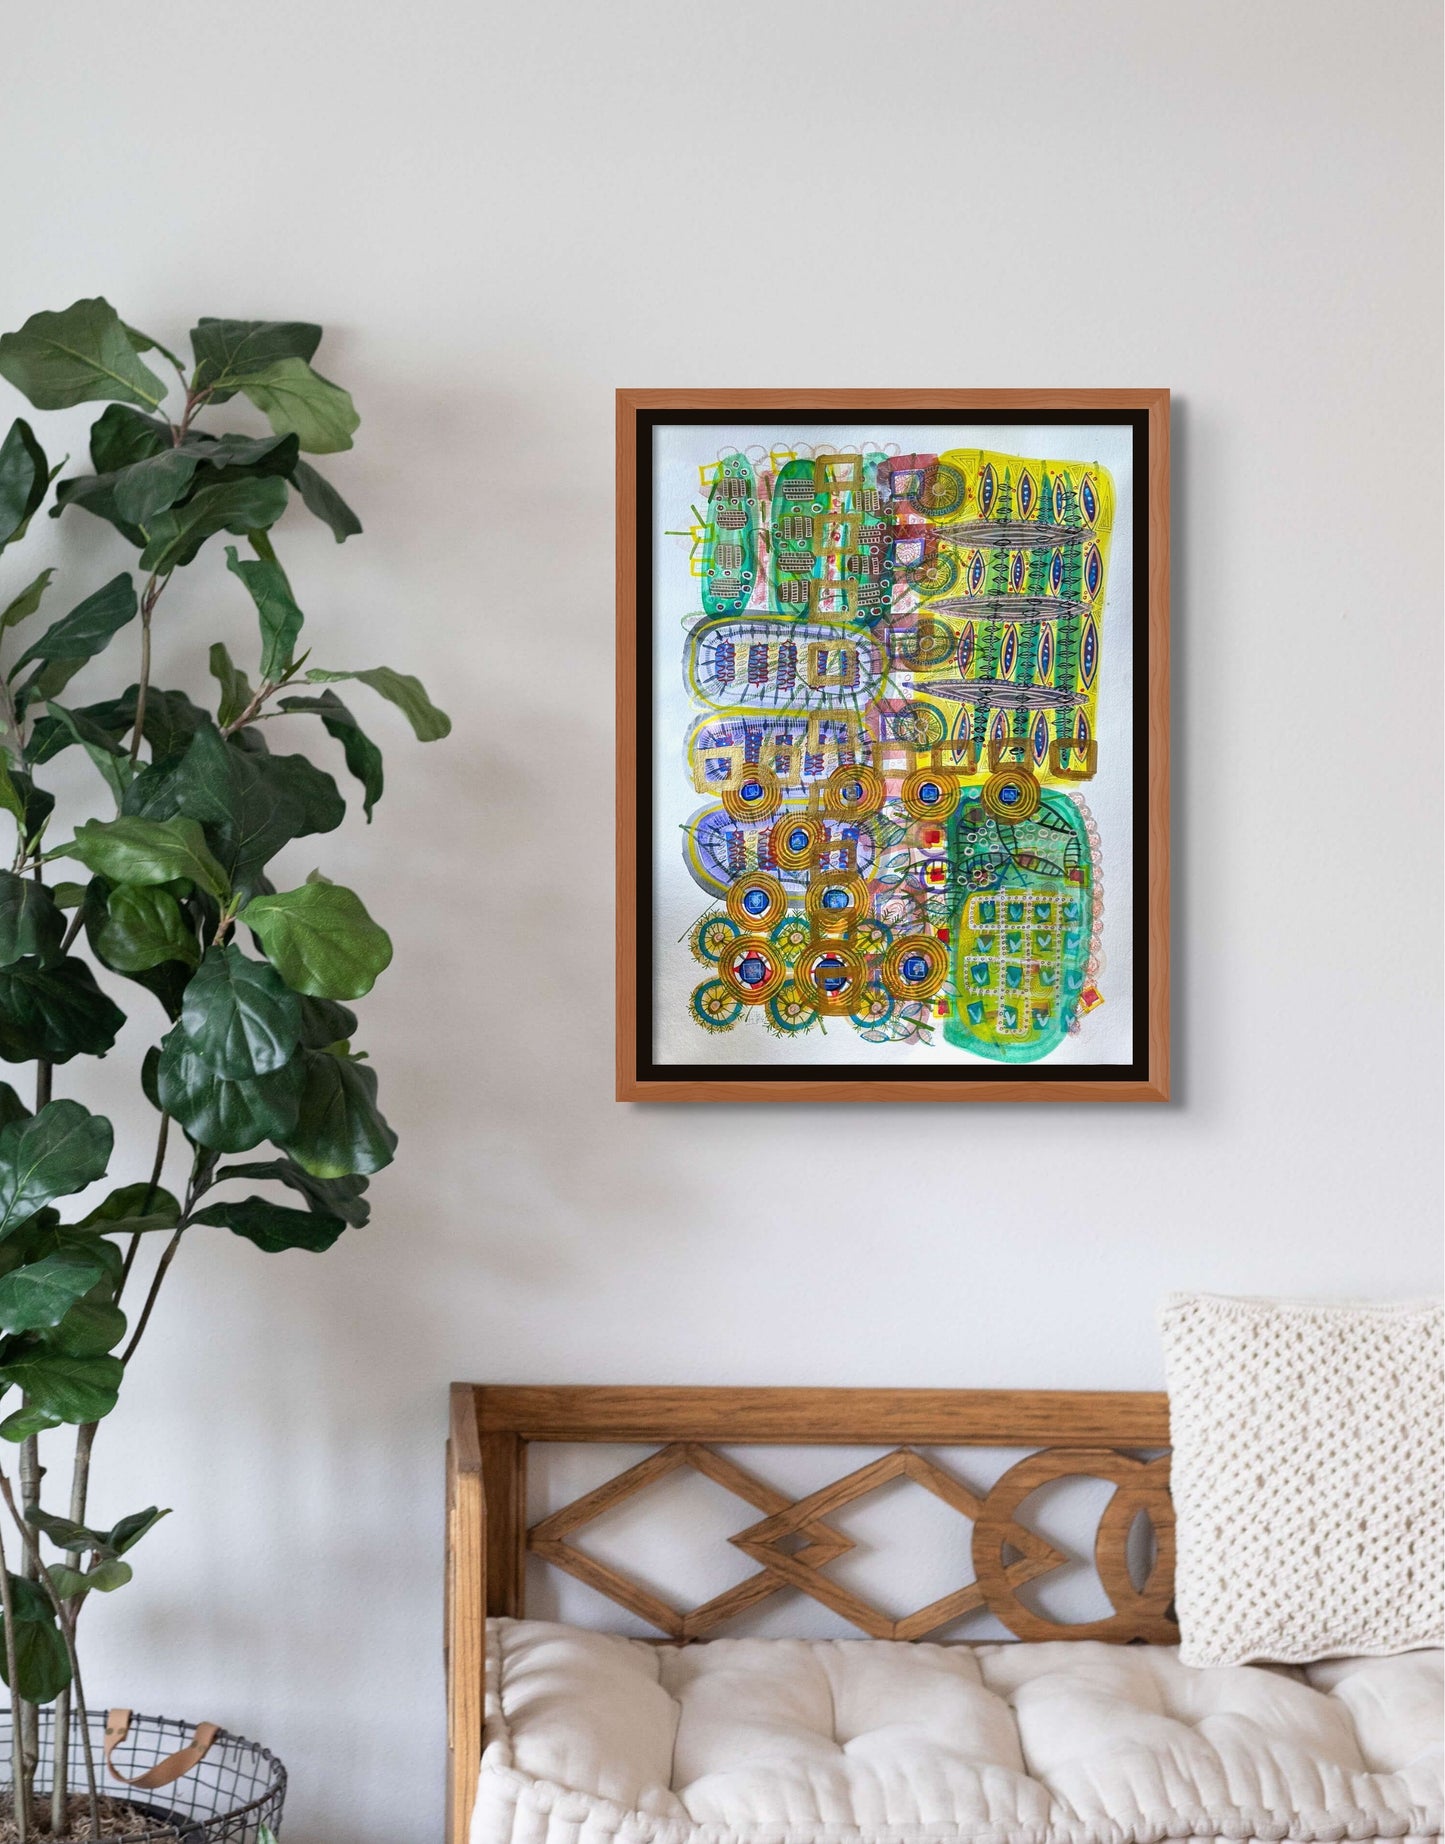 Colorful mixed media abstract and graphic design titled Circuit Board by artist Jenifer Hernandez., framed for display only in cherry wood and floated on black background.